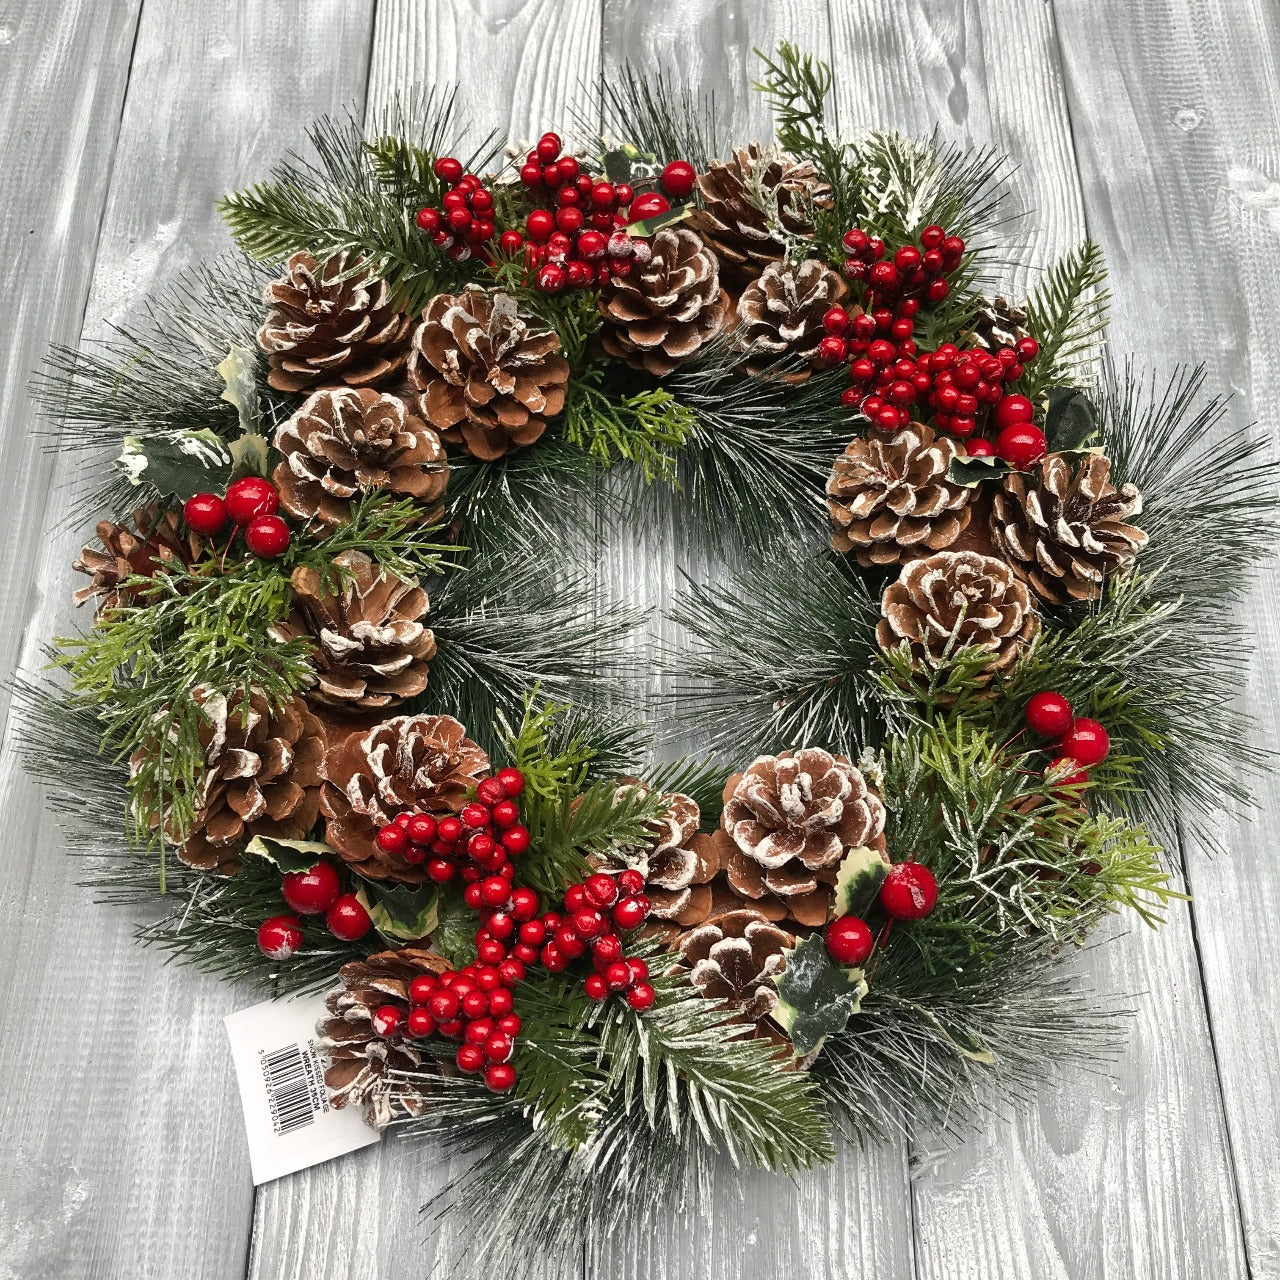 Enchante Christmas Wreath - Snow Kissed Foliage  Beautiful Christmas Wreath - with pine cones, berries - all with a frosting of snow